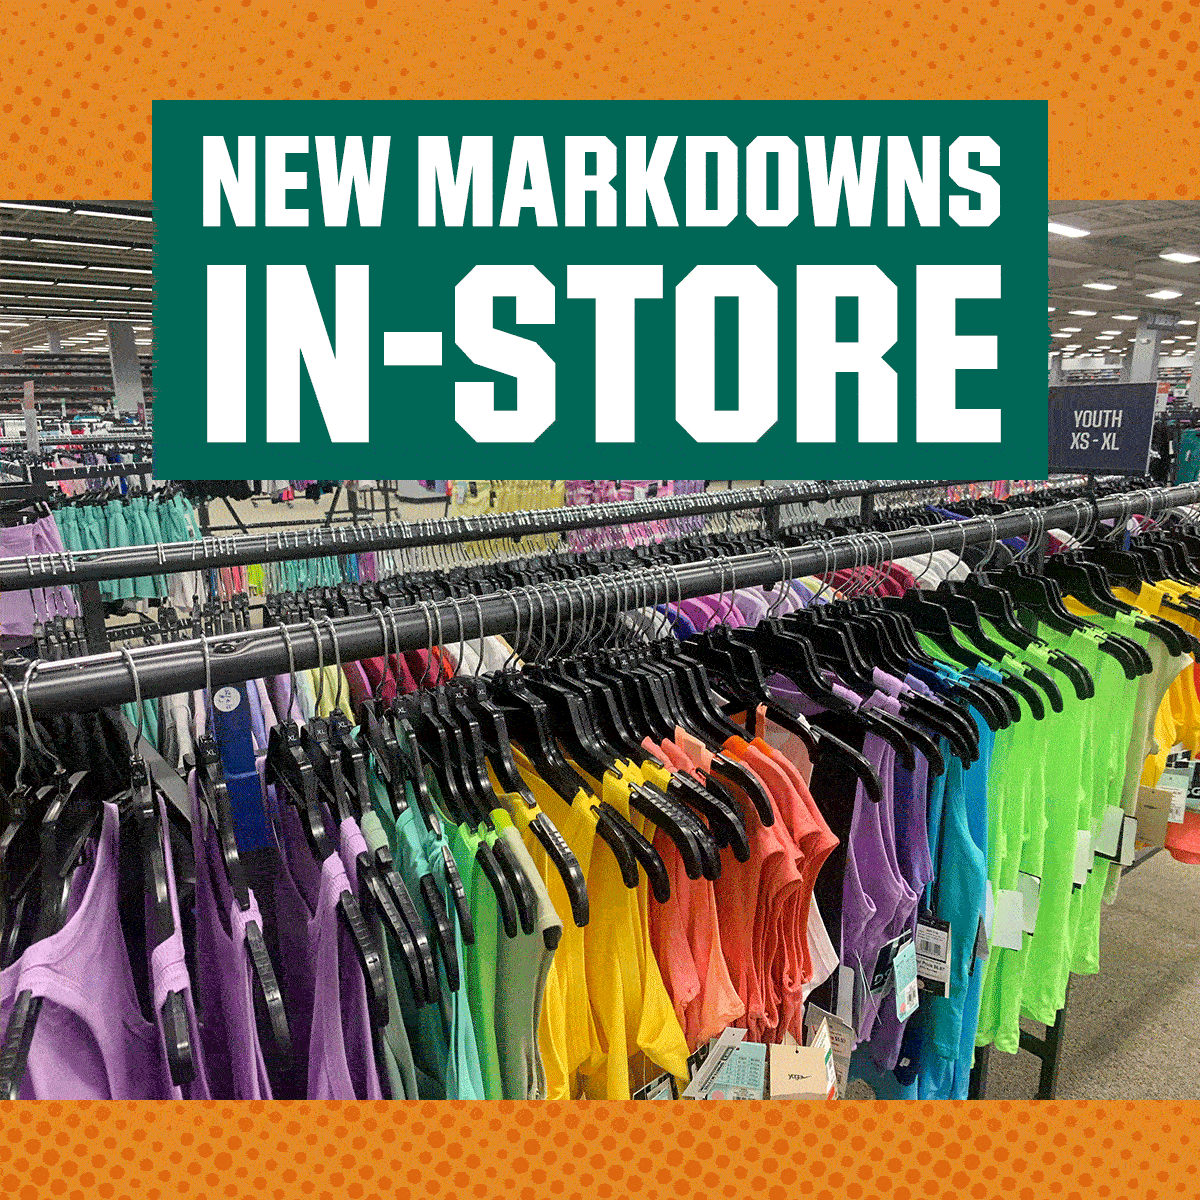 👋 New markdowns you'll want to see - Dick's Sporting Goods